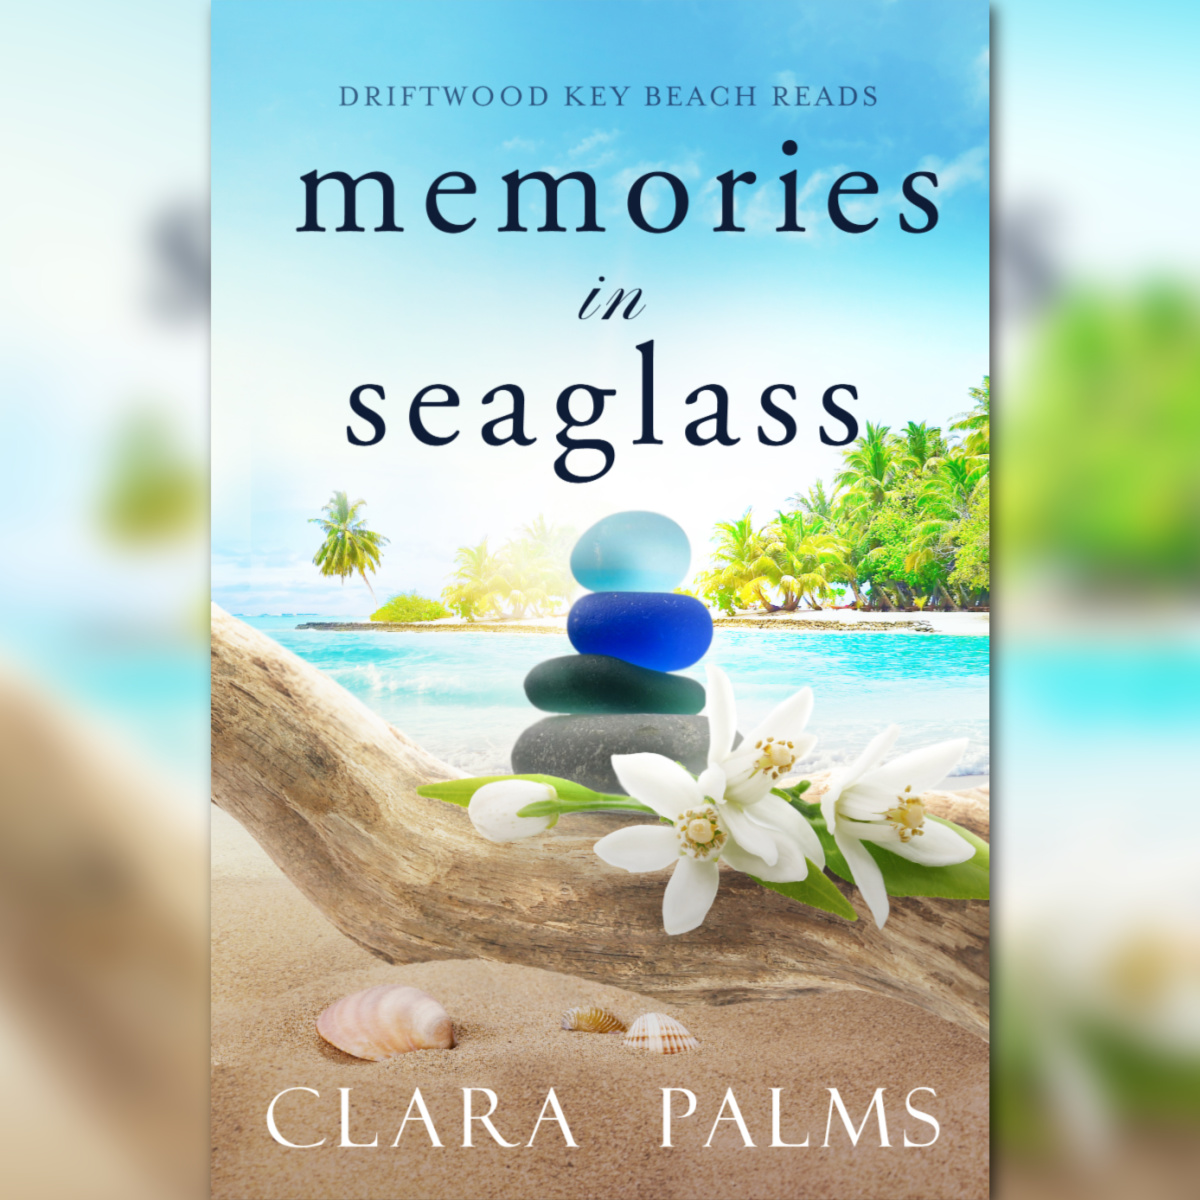 Memories in Seaglass by Clara Palms releases on May 14th!

geni.us/MemoriesinSeag…
FREE with Kindle Unlimited!

#contemporaryromance #romancenovel #RomanceBook #Bookstagram #books #bookblog #BookNerd #AdultBooks #booklover #romancereader  @ElleWoodsPR  #1852mdia